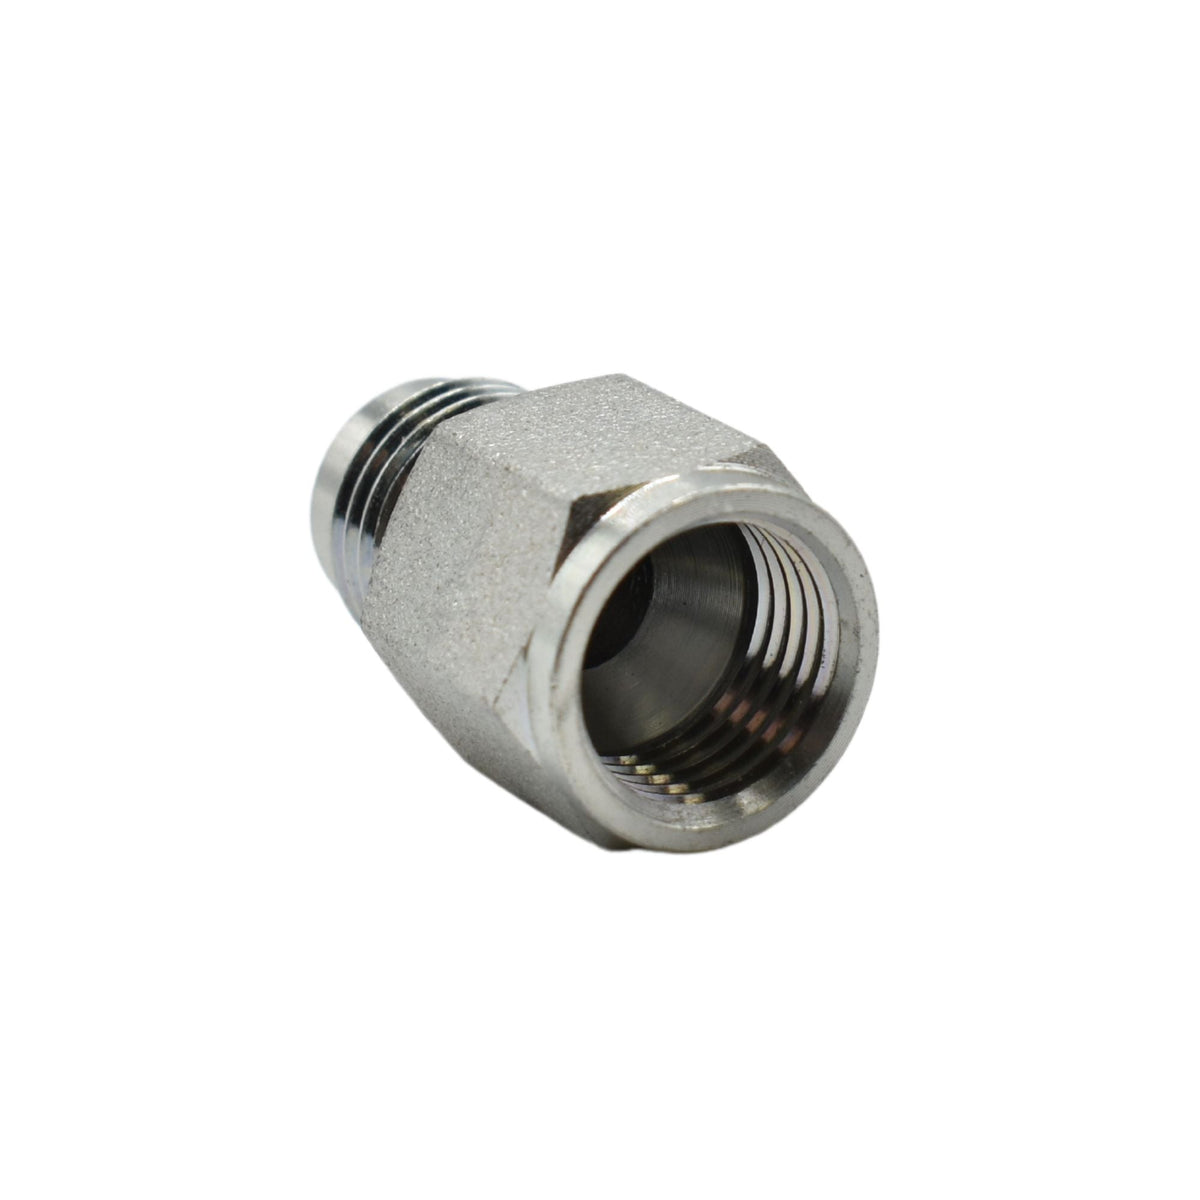 Reducer with .031 restricted orifice Adapter